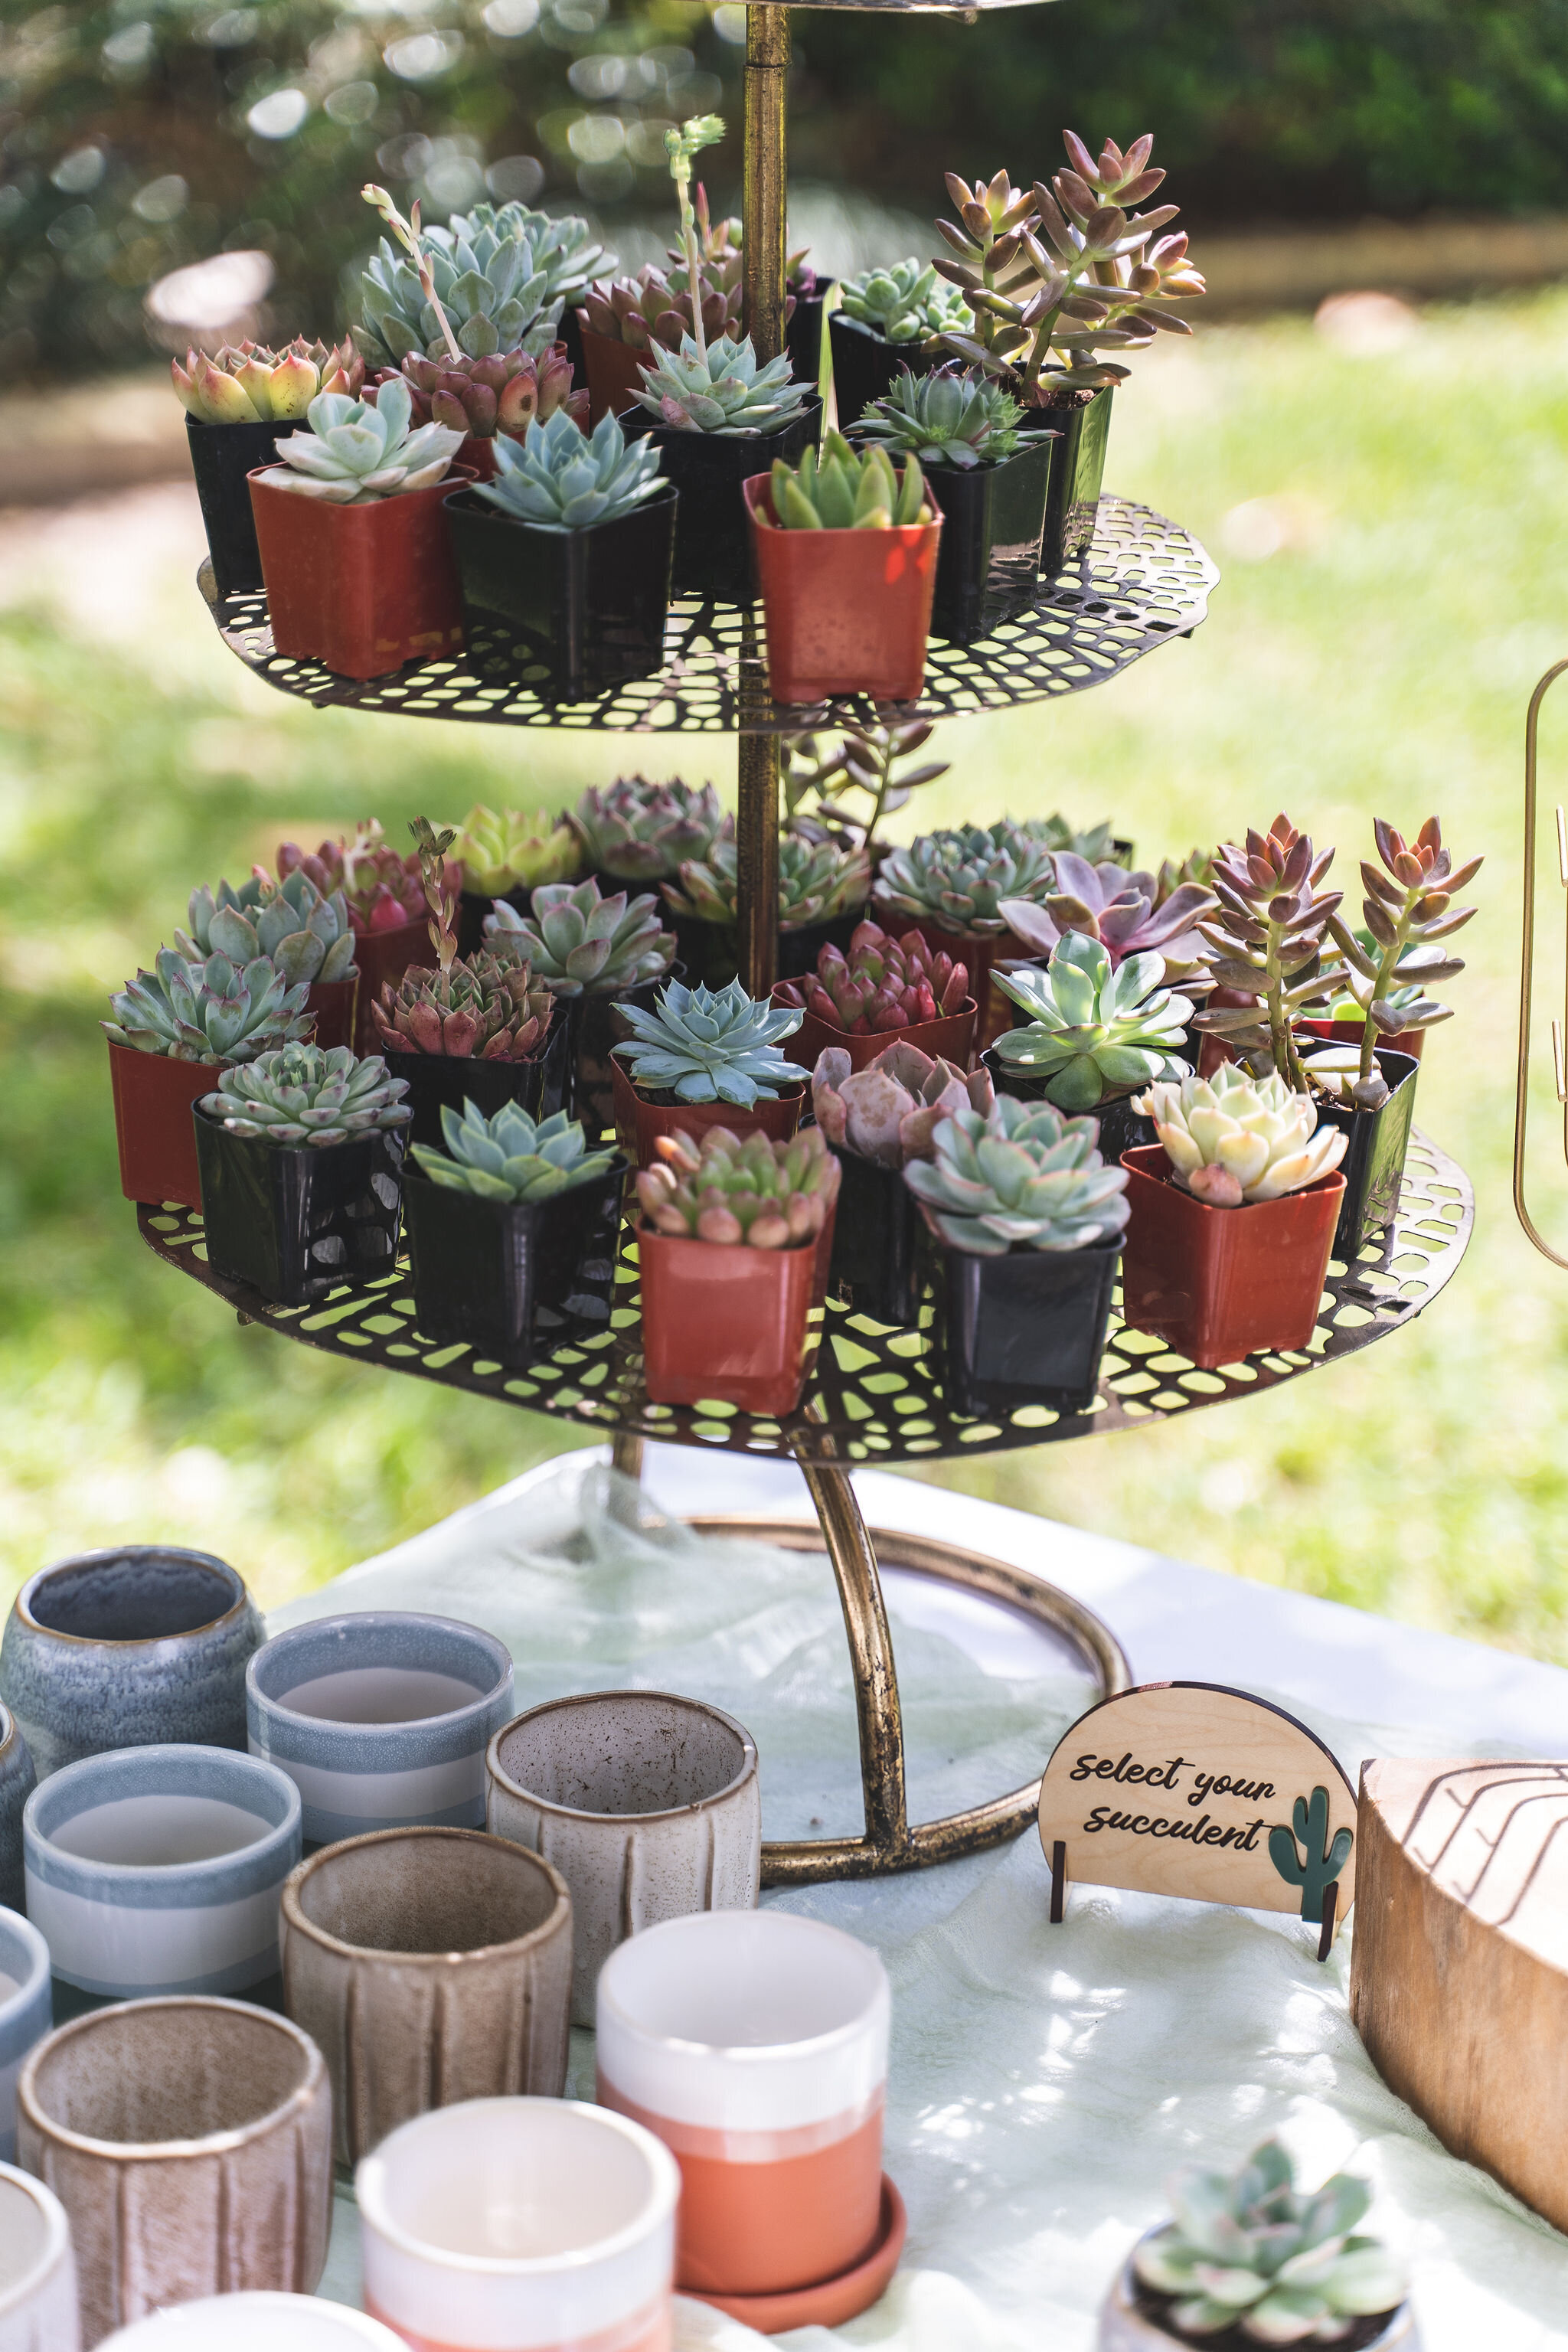 DIY Succulent favor table for bridal showers baby showers corporate succulent planting events unique party favor ideas and personalized gifting